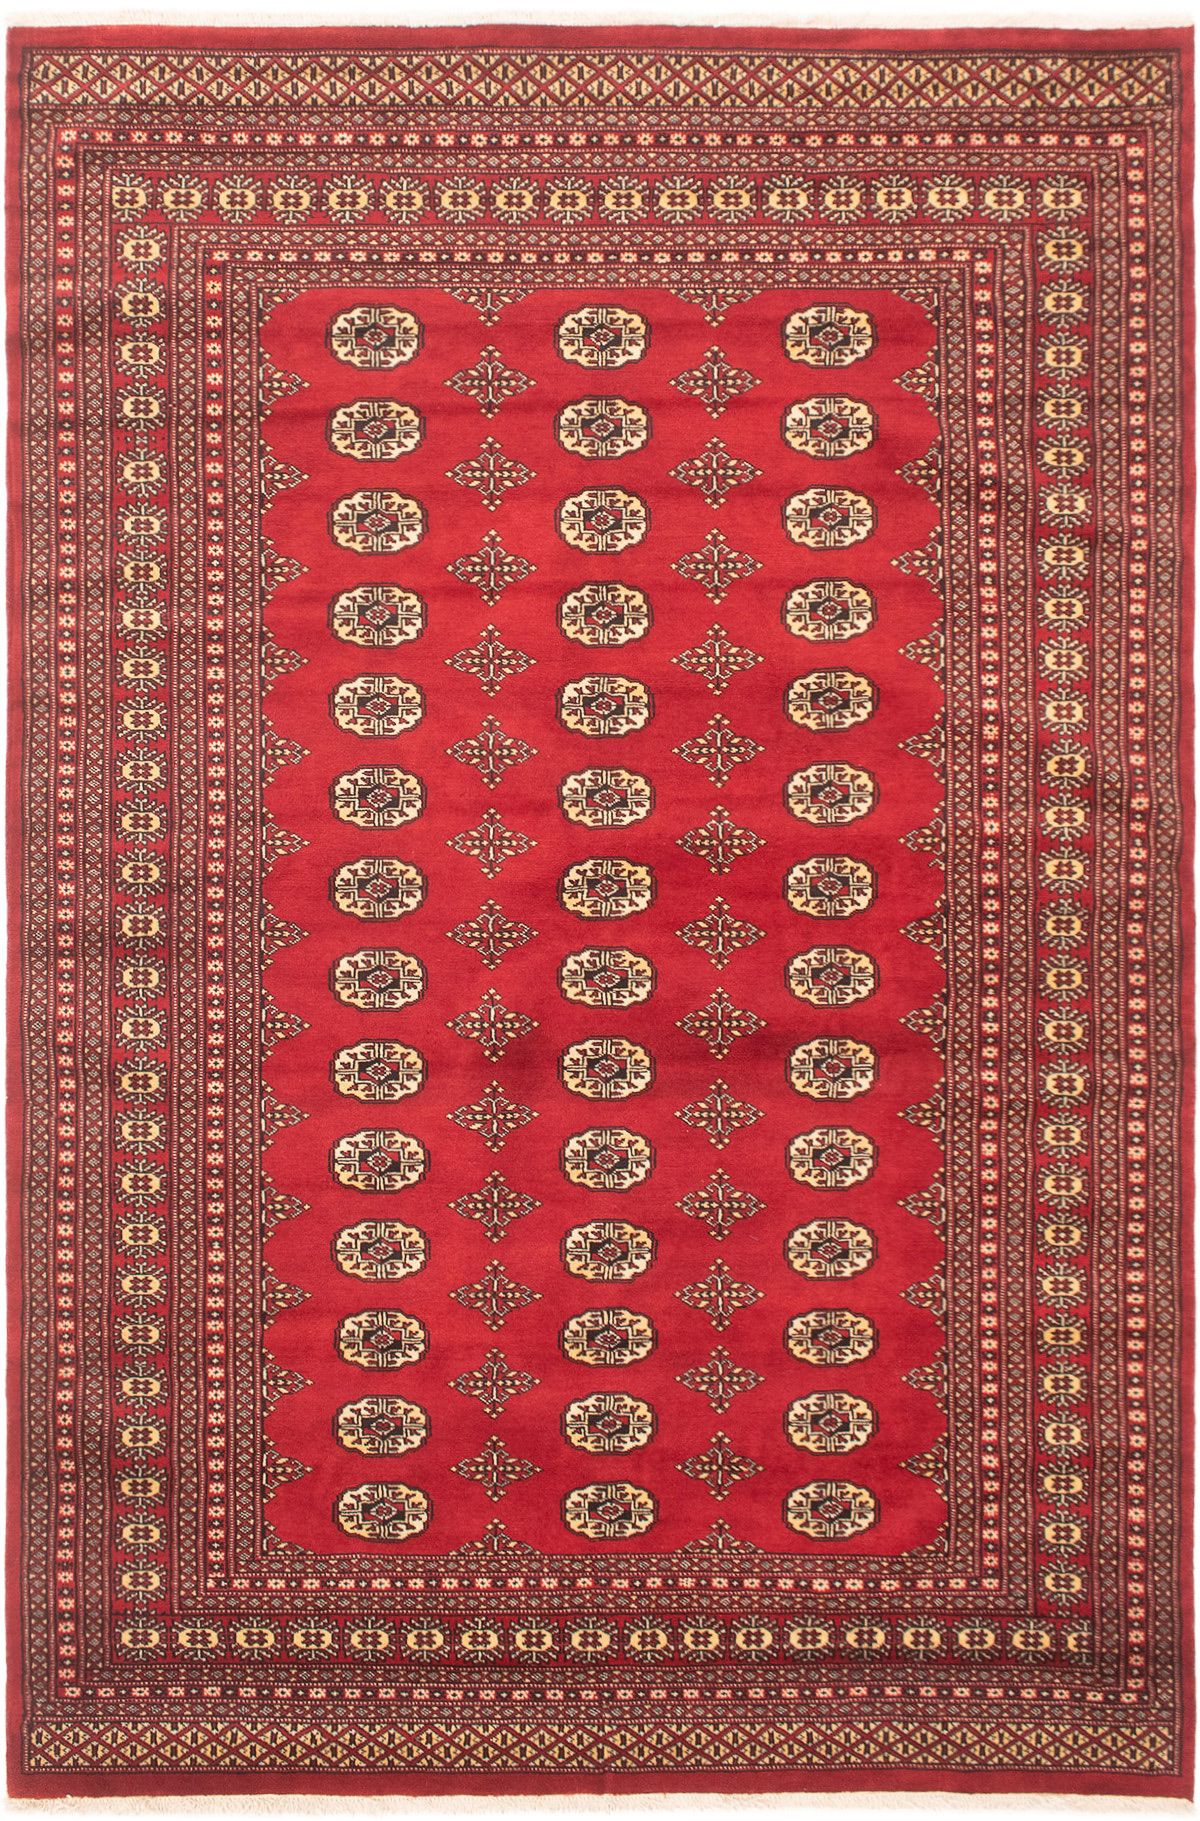 Hand-knotted Finest Peshawar Bokhara Red Wool Rug 6'0" x 9'2"  Size: 6'0" x 9'2"  